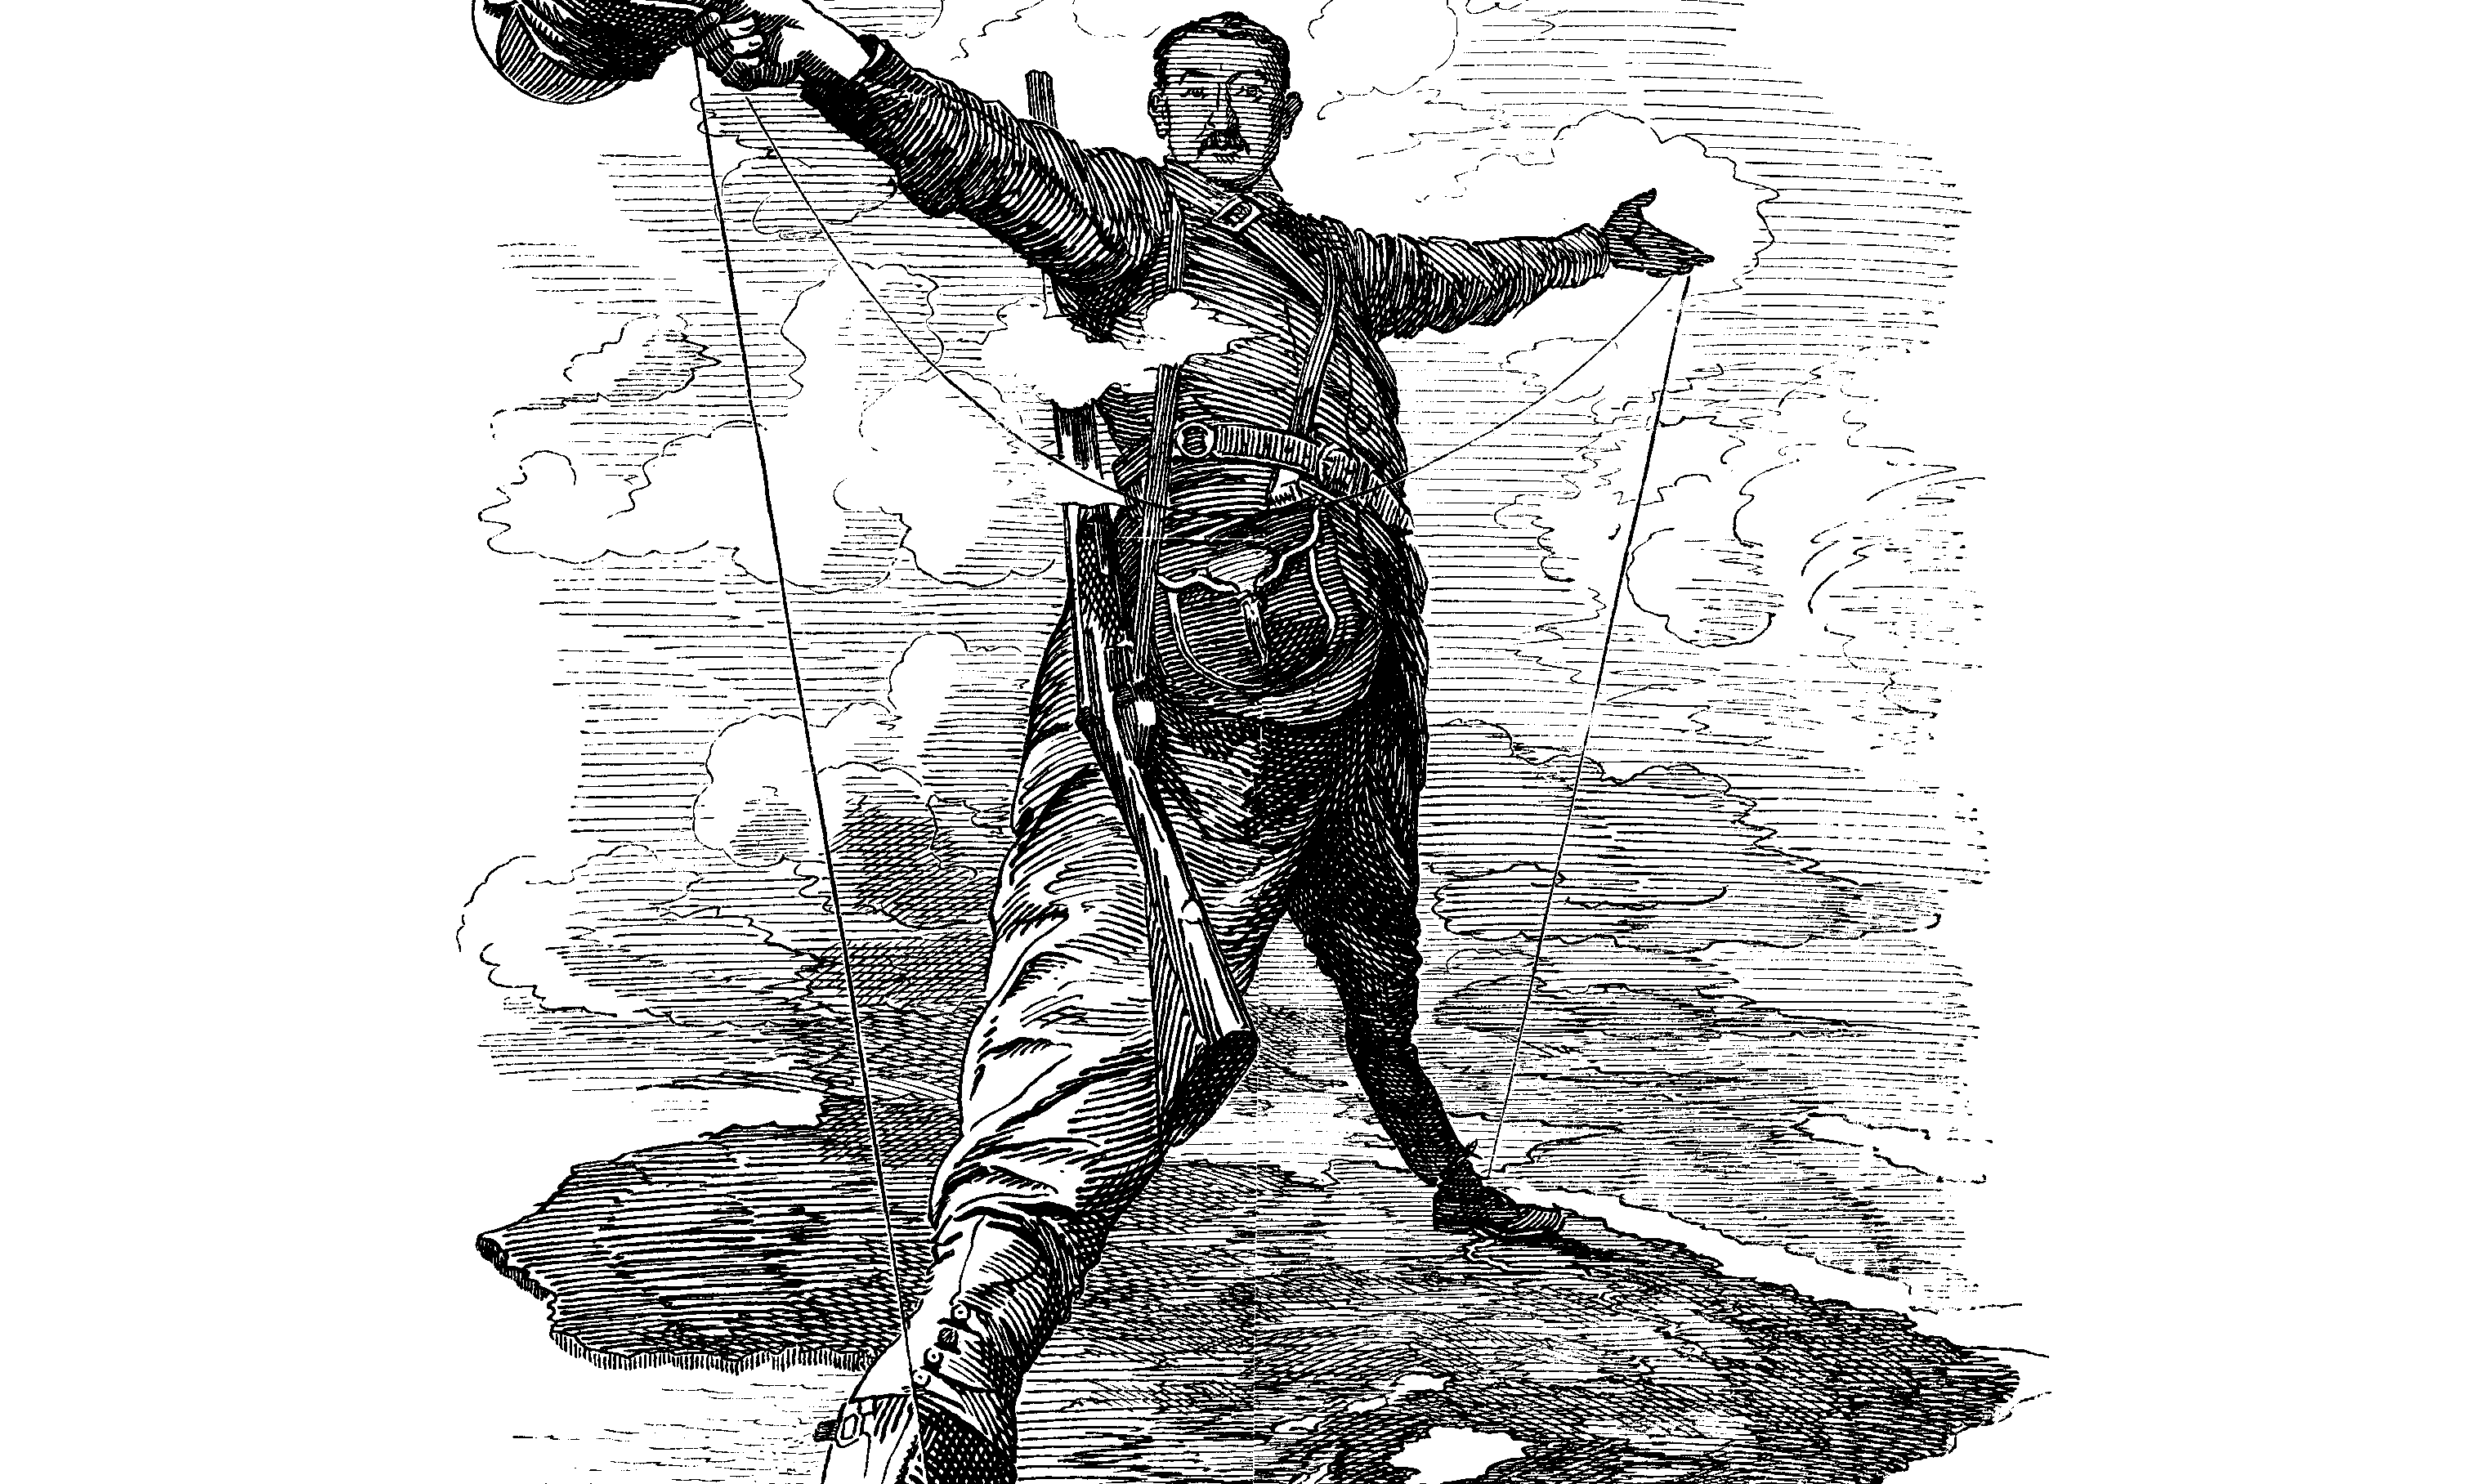 The Rhodes Colossus: Caricature of Cecil John Rhodes, after he announced plans for a telegraph line and railroad from Cape Town to Cairo.